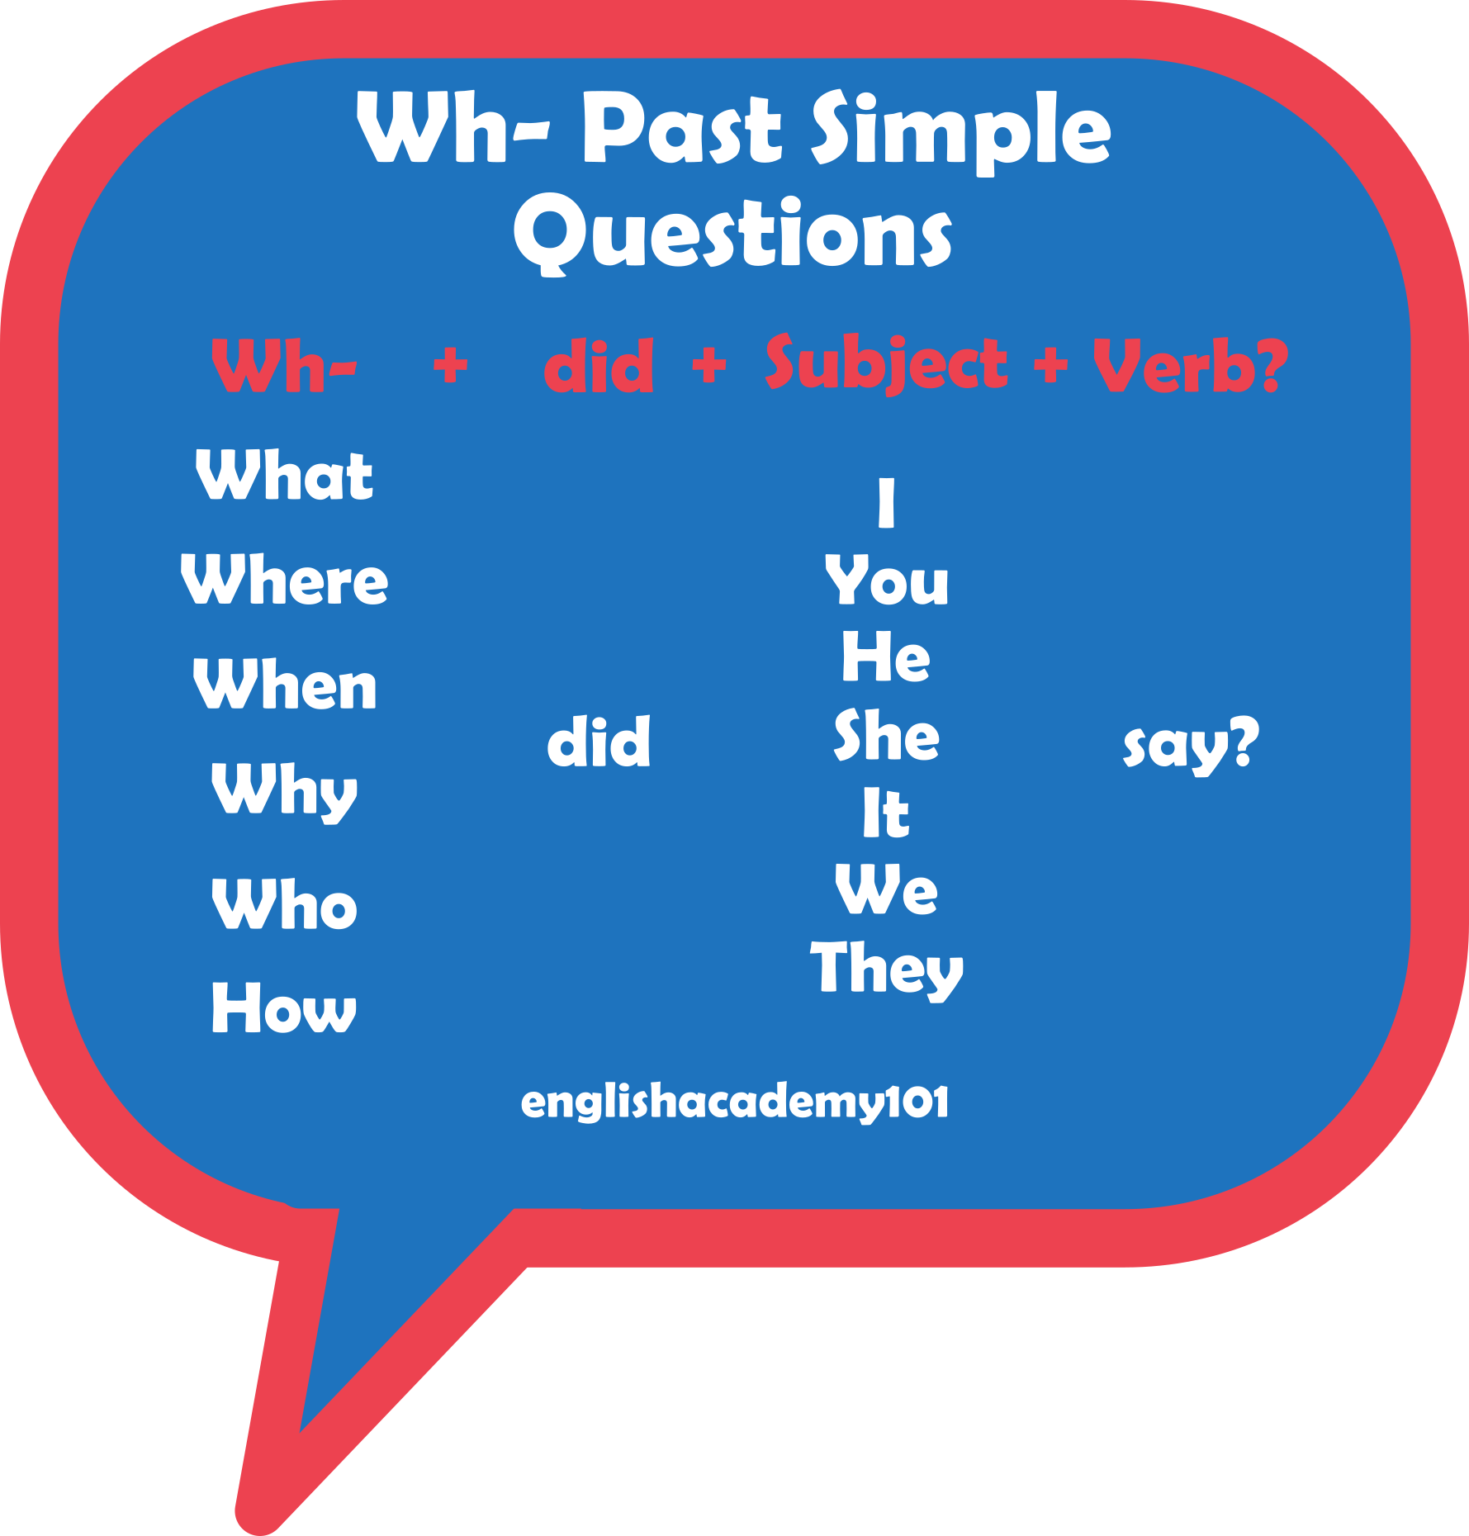 past simple questions